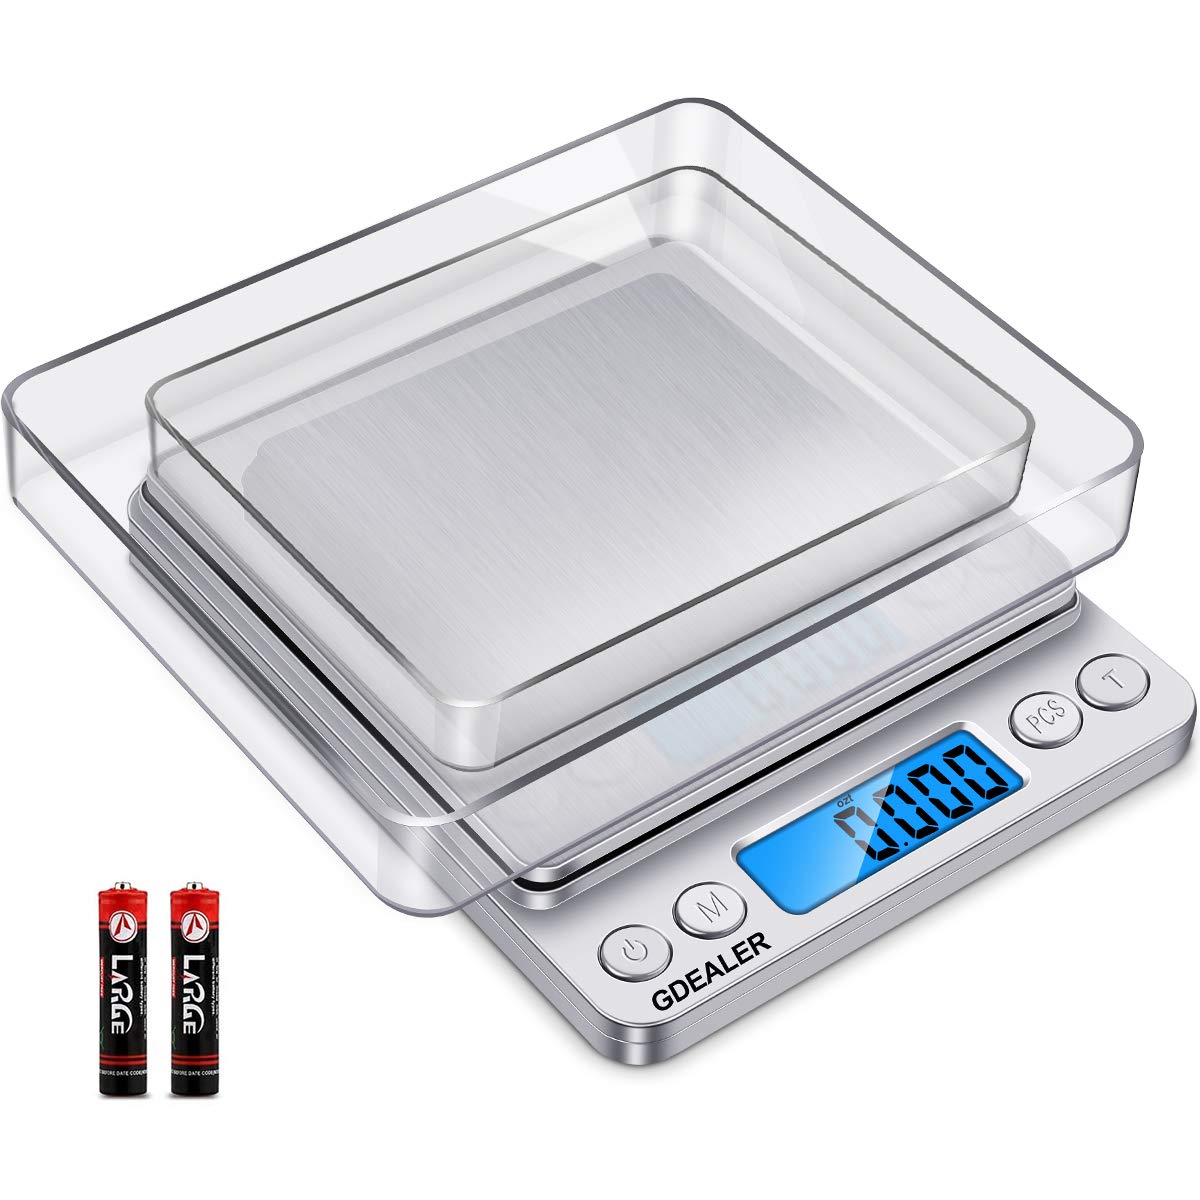 GDEALER Food Scale, 0.001oz Precise Digital Kitchen Scale Gram Scales Weight Food Coffee Scale Digital Scales for Cooking Baking Stainless Steel Back-lit LCD Display Pocket Small Scale, Silver